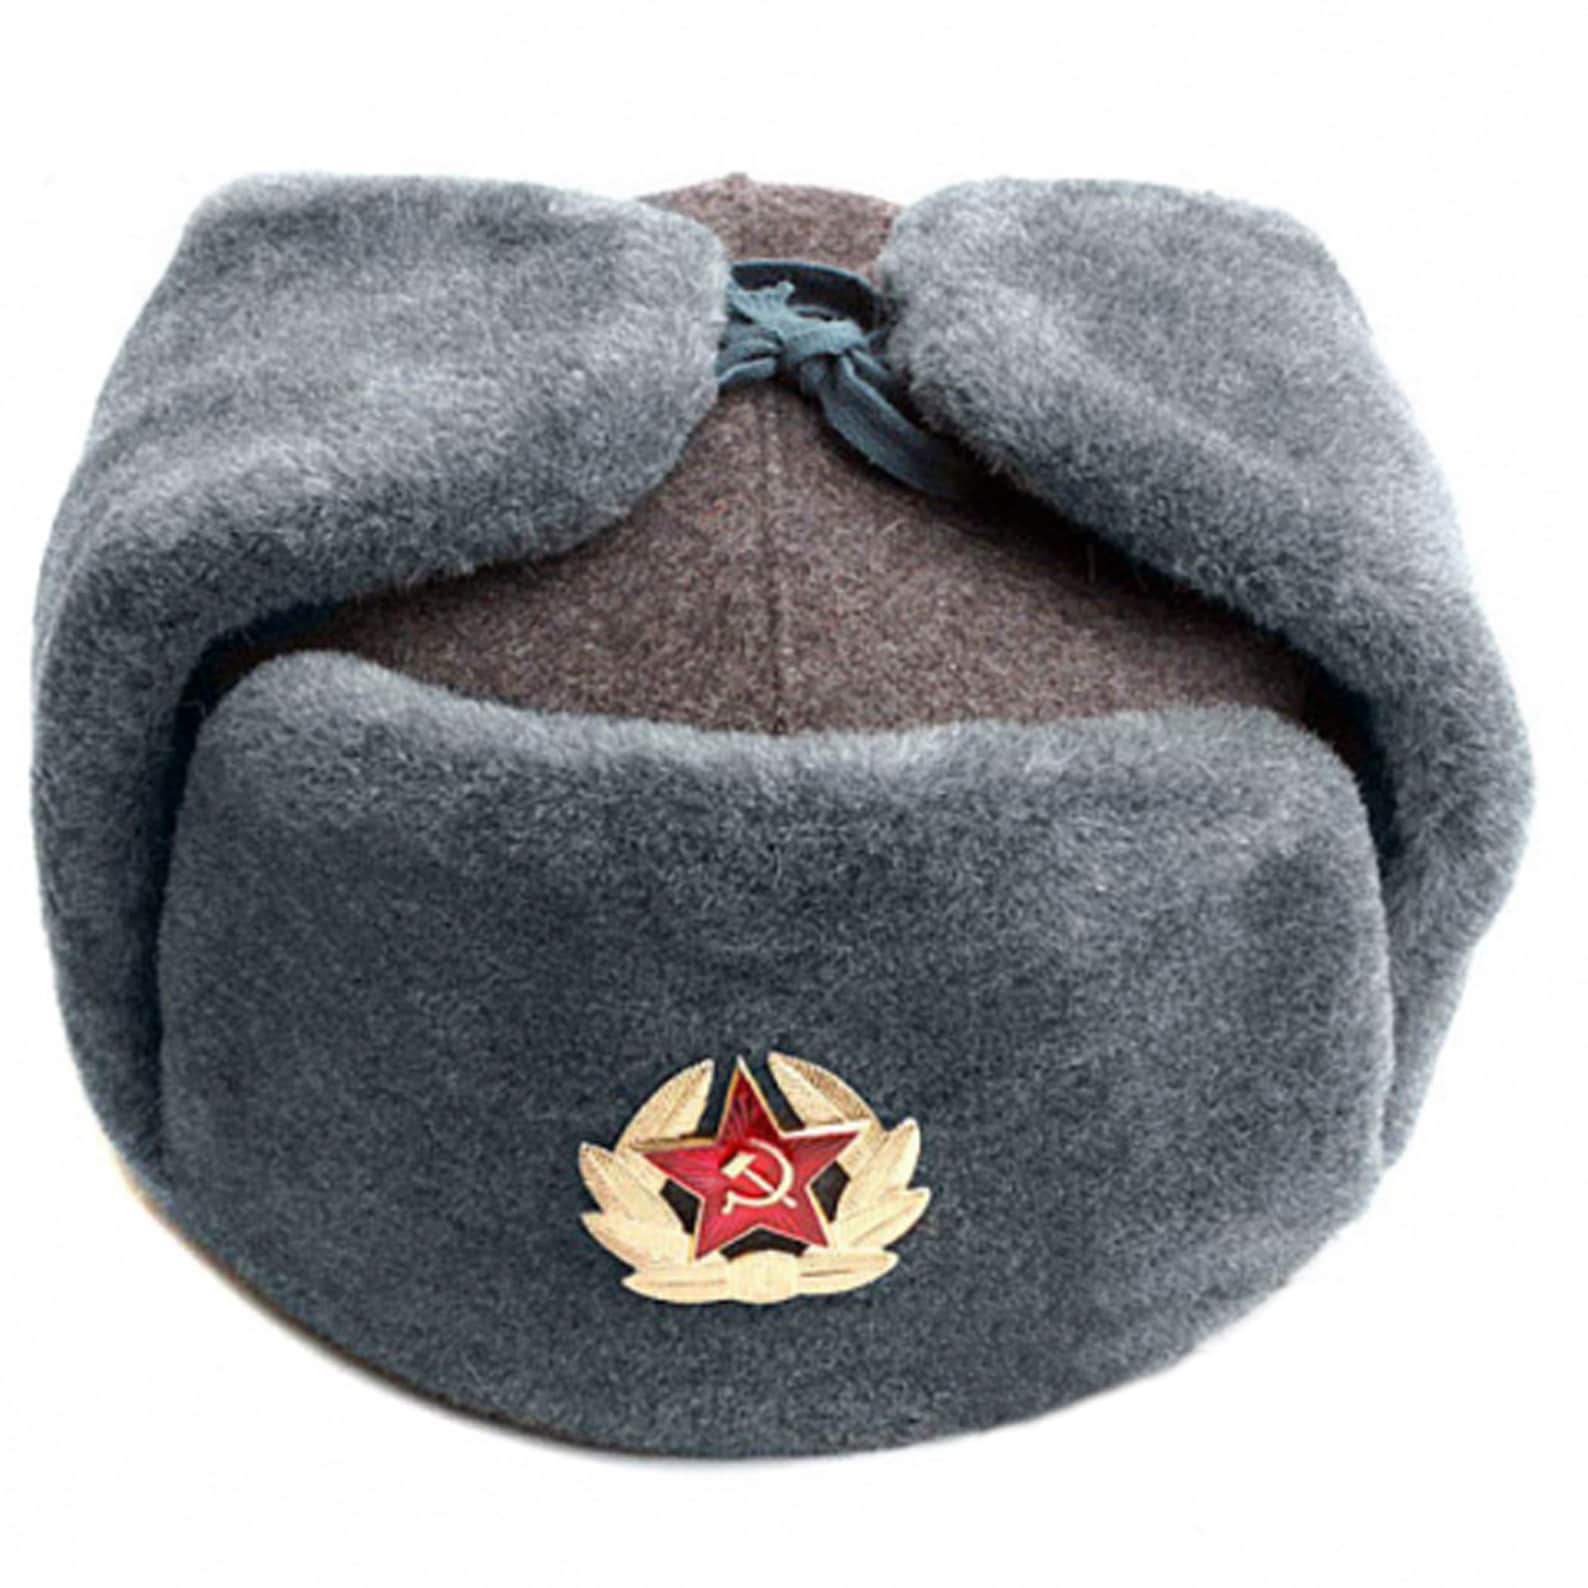 Russian Army Winter Hat - Army Military